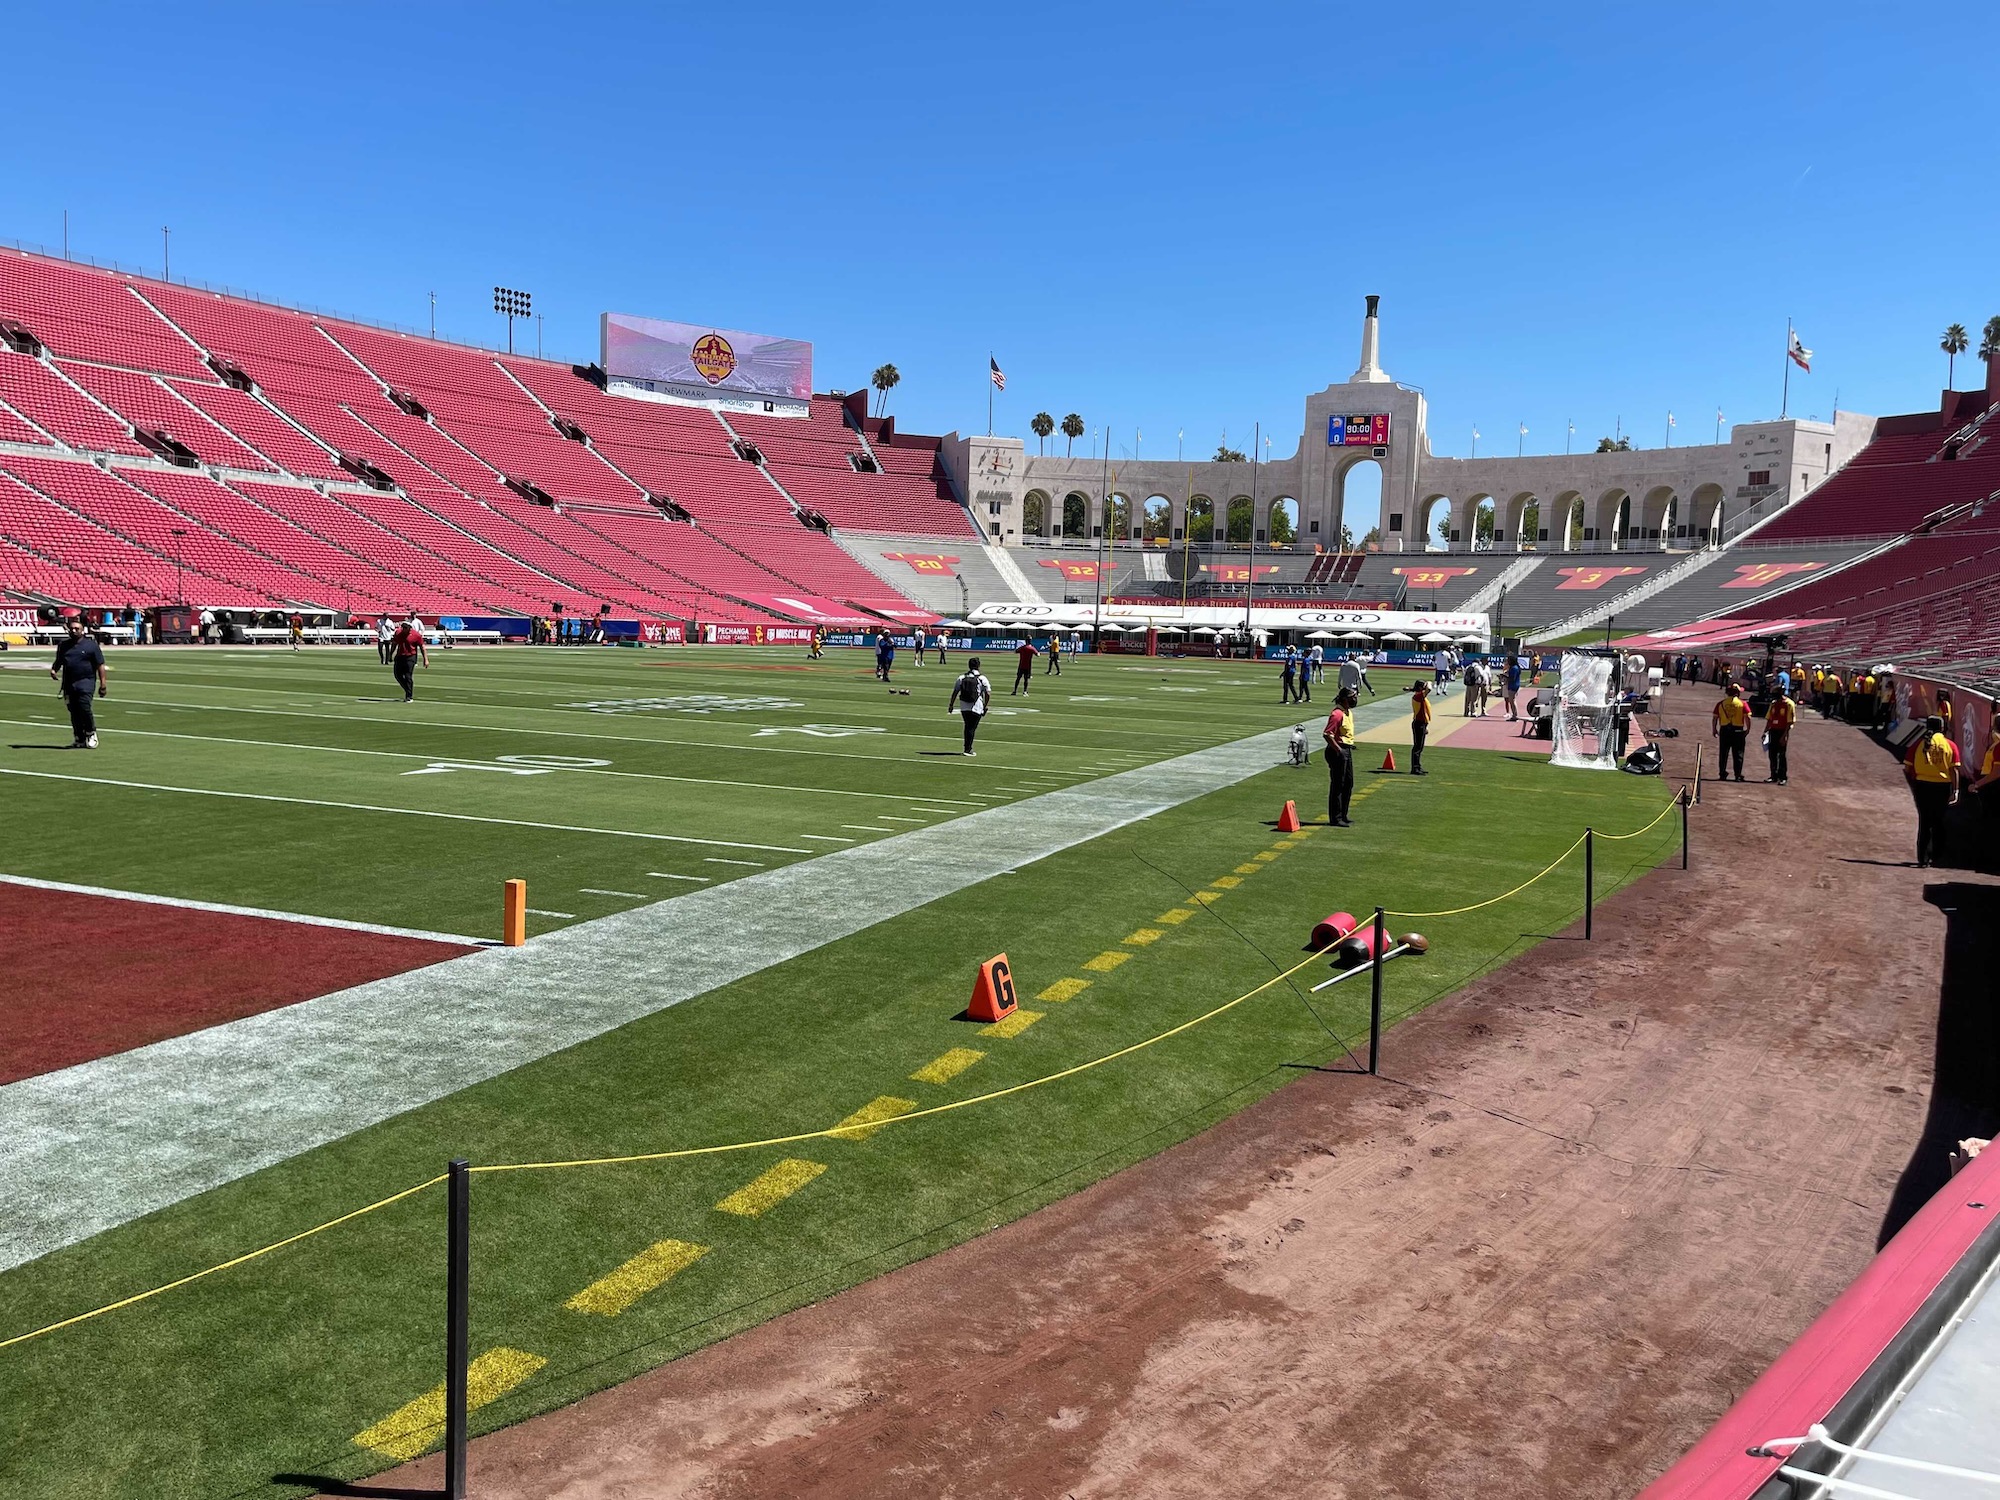 Spring Football Is Back For The USC Trojans In Southern California